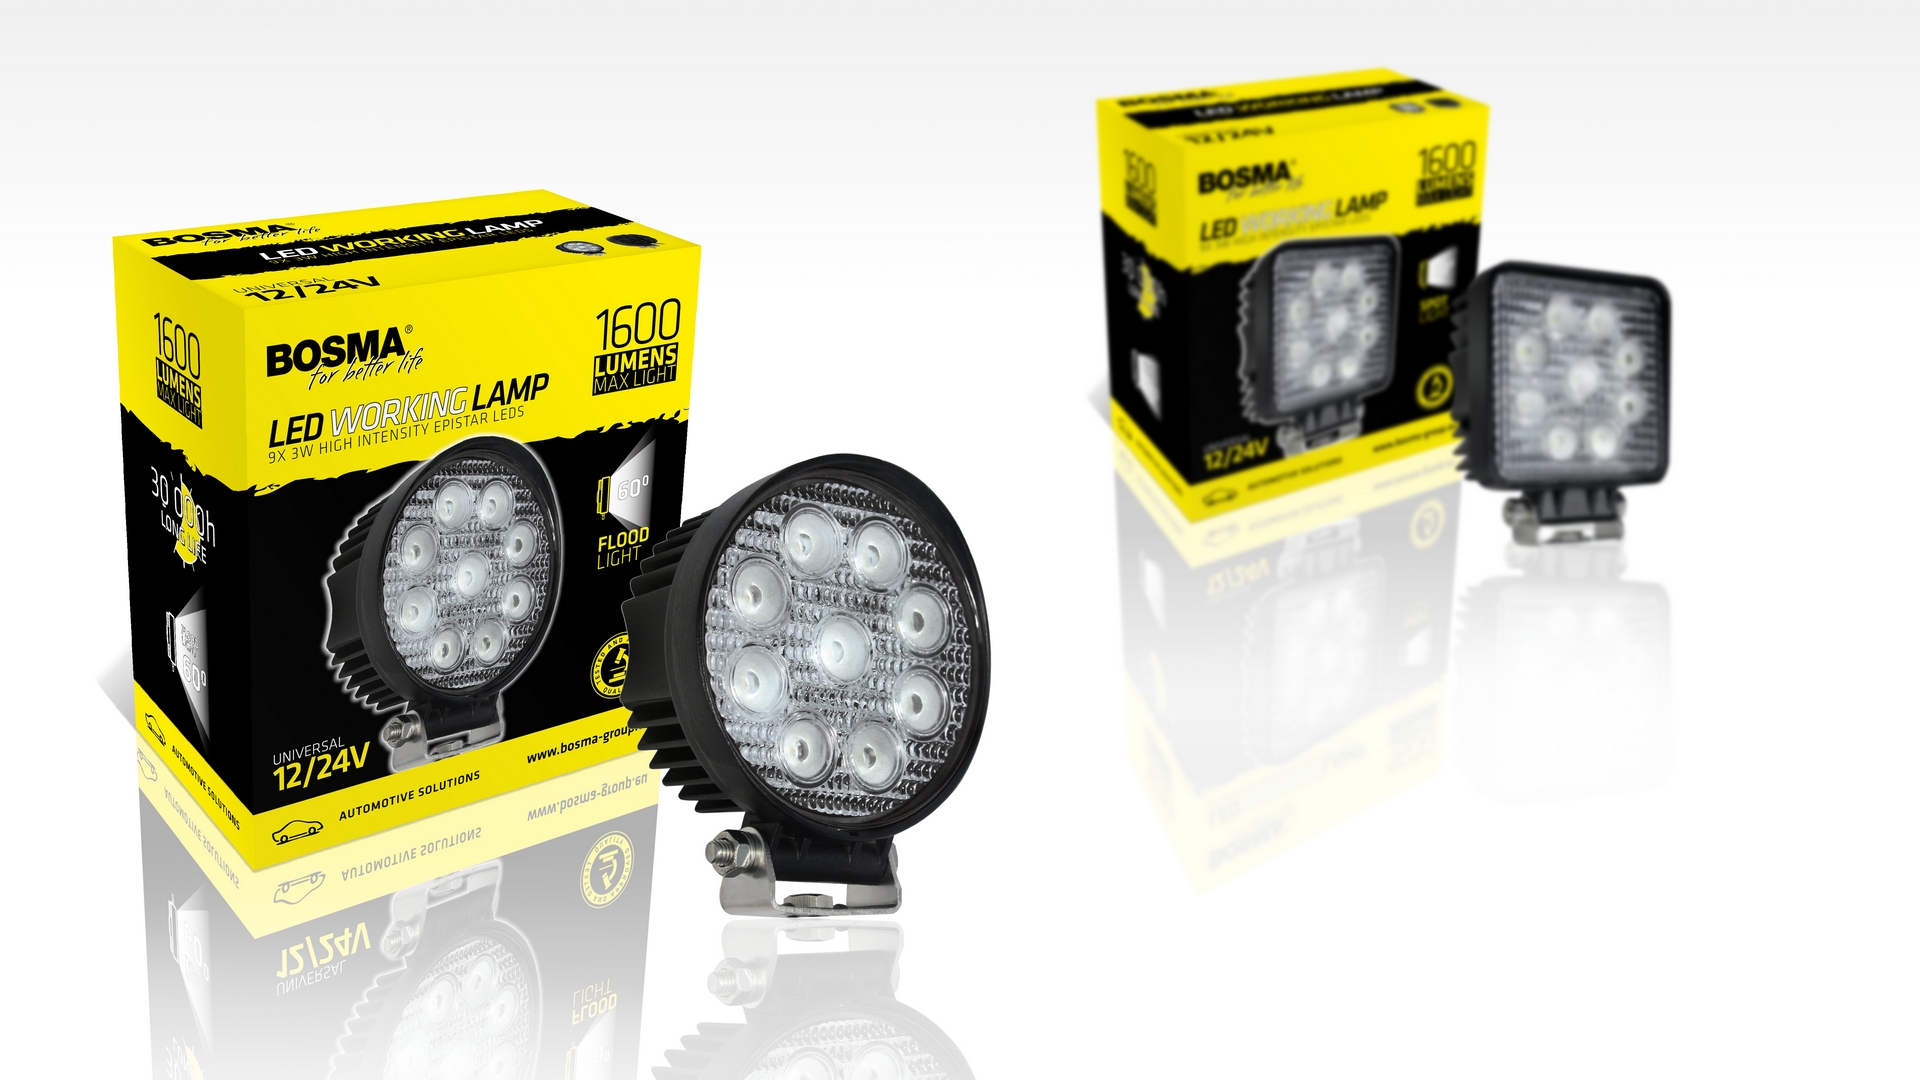 LED WORKING LAMPS |